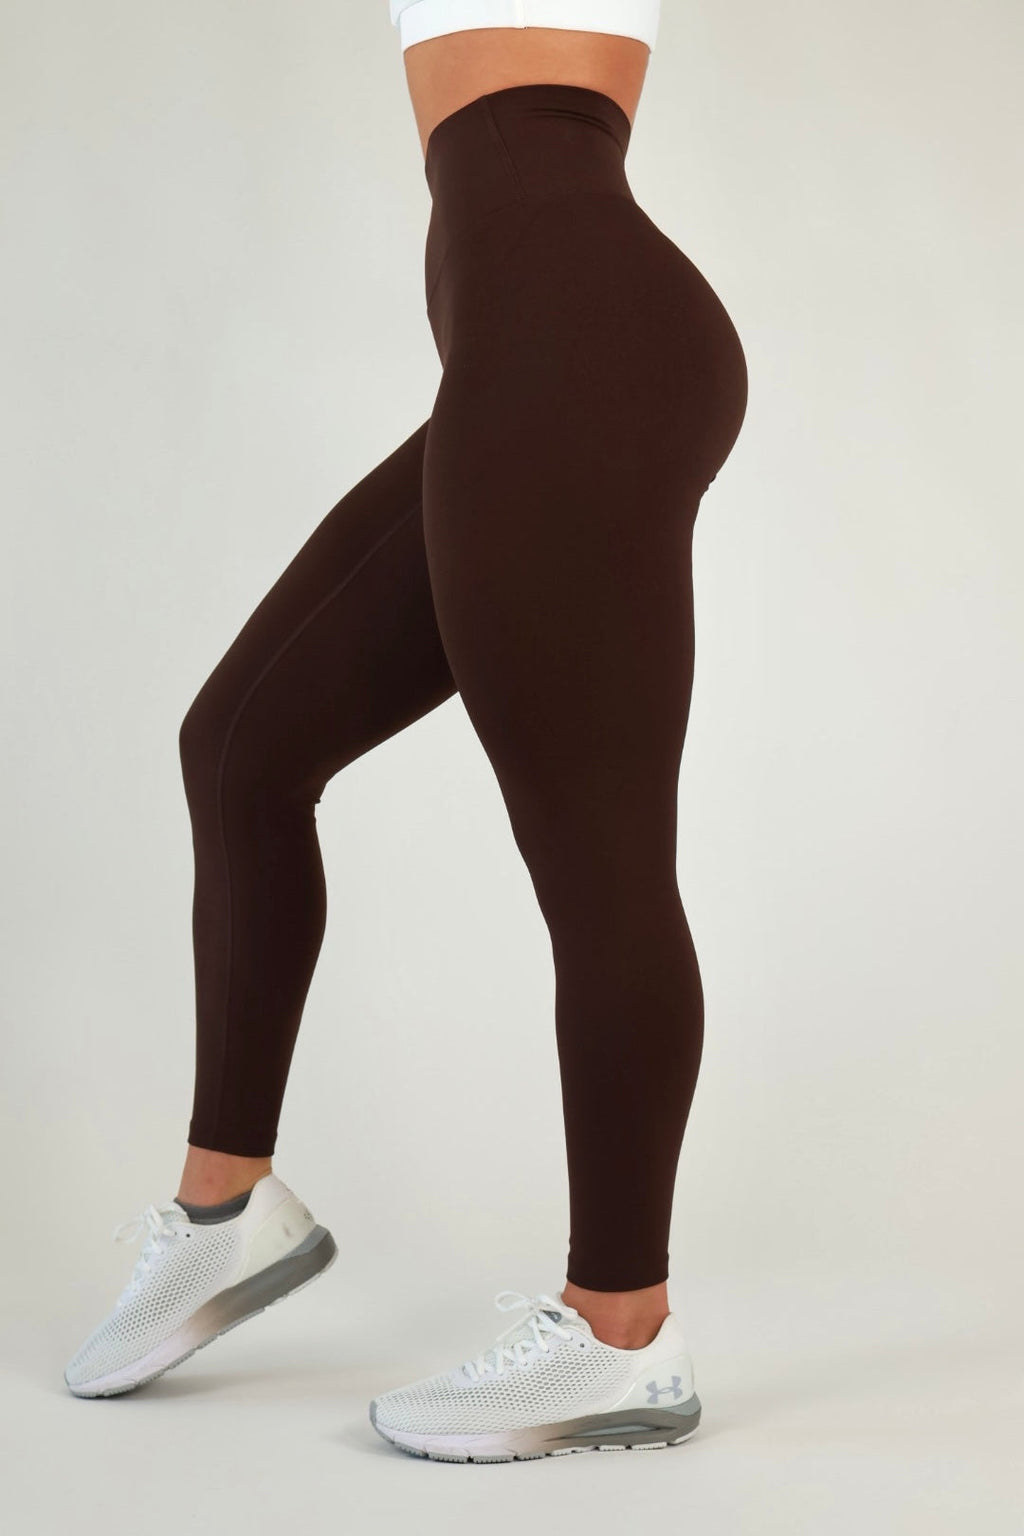 FREE SPIRIT OUTLET TRY ON HAUL & REVIEW  Fav affordable activewear,  leggings, shorts, ect 